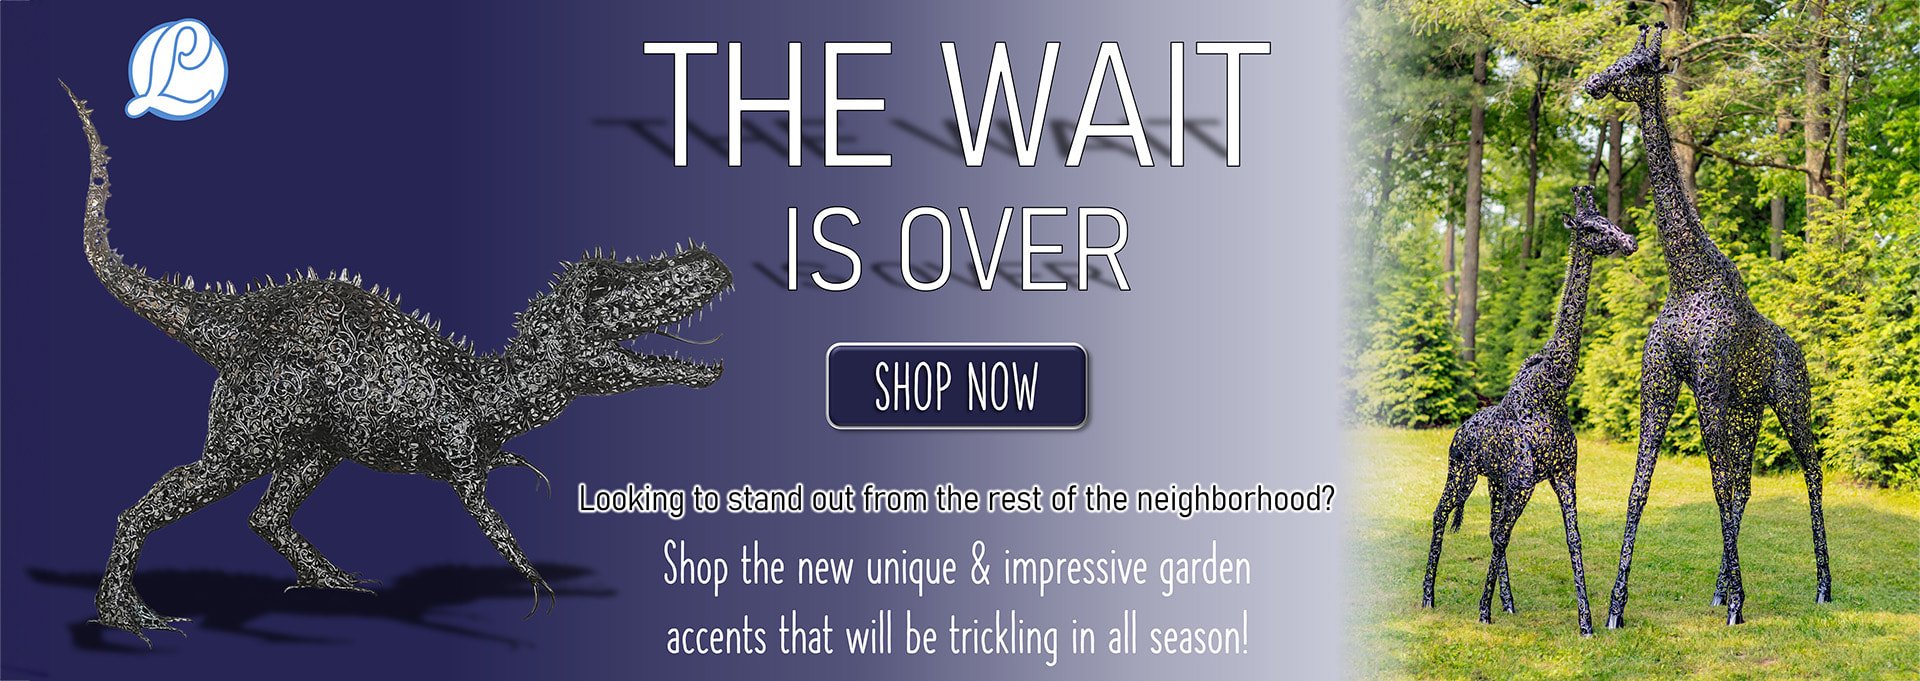 The Wait Is Over | Looking to stand out from the rest of the neighborhood? Shop the new unique and impressive garden accents that will be trickling in all season